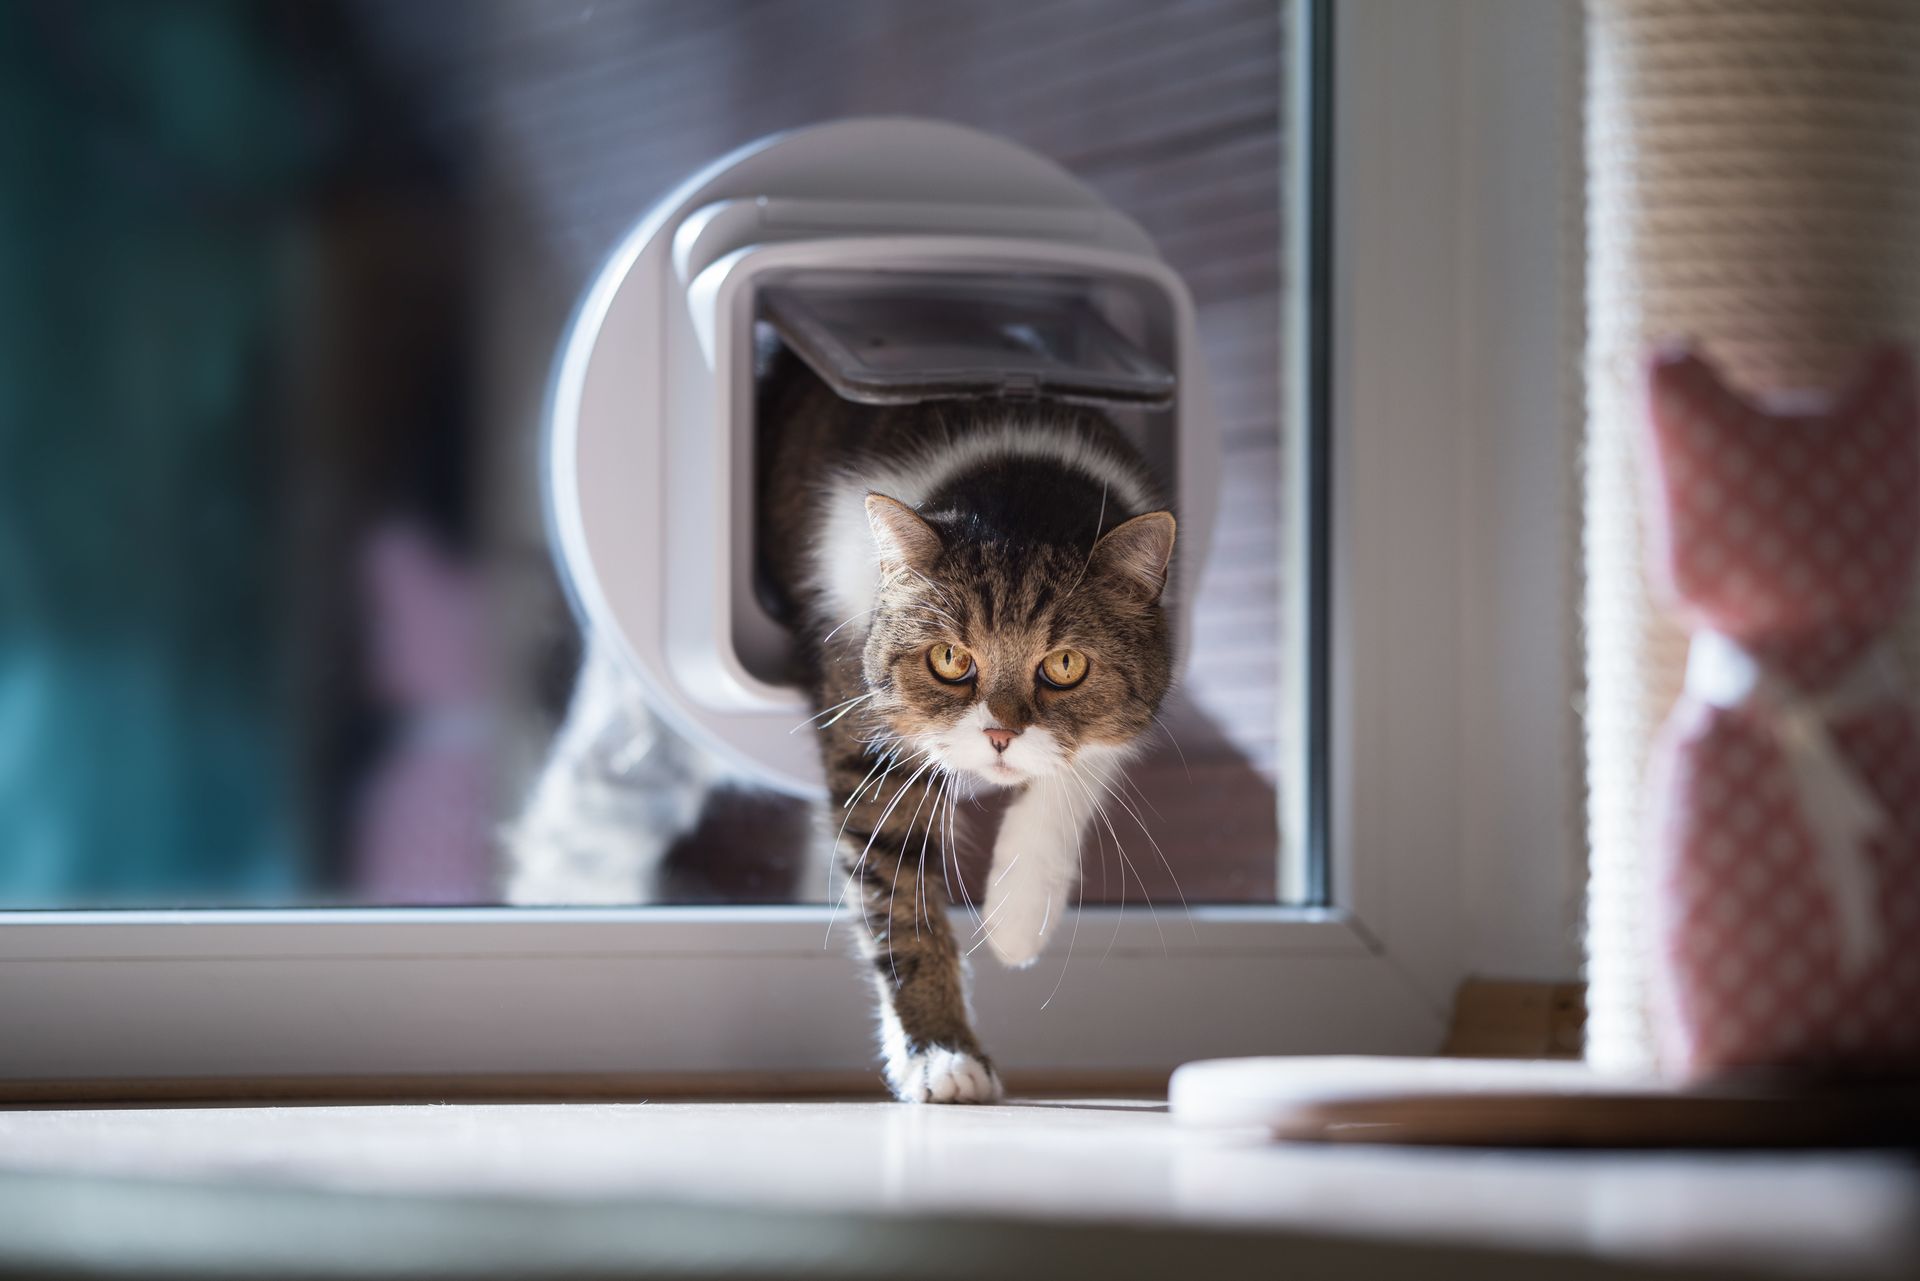 What to do when your cat goes missing